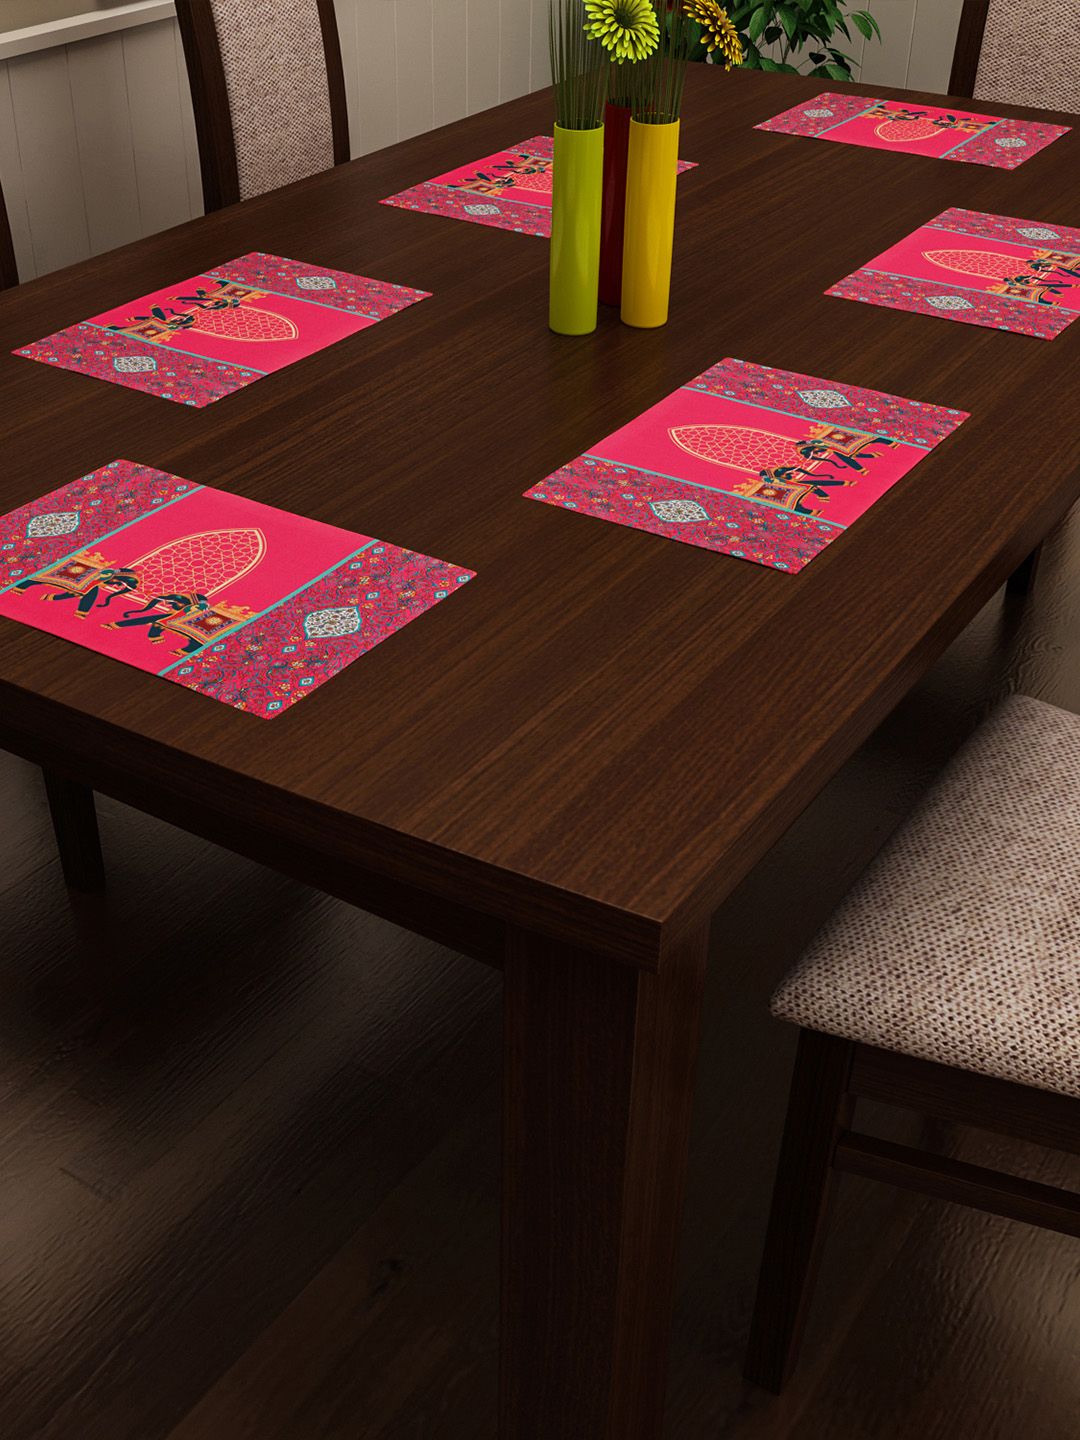 SEJ by Nisha Gupta Set of 6 Pink & Green Printed Table Placemats Price in India